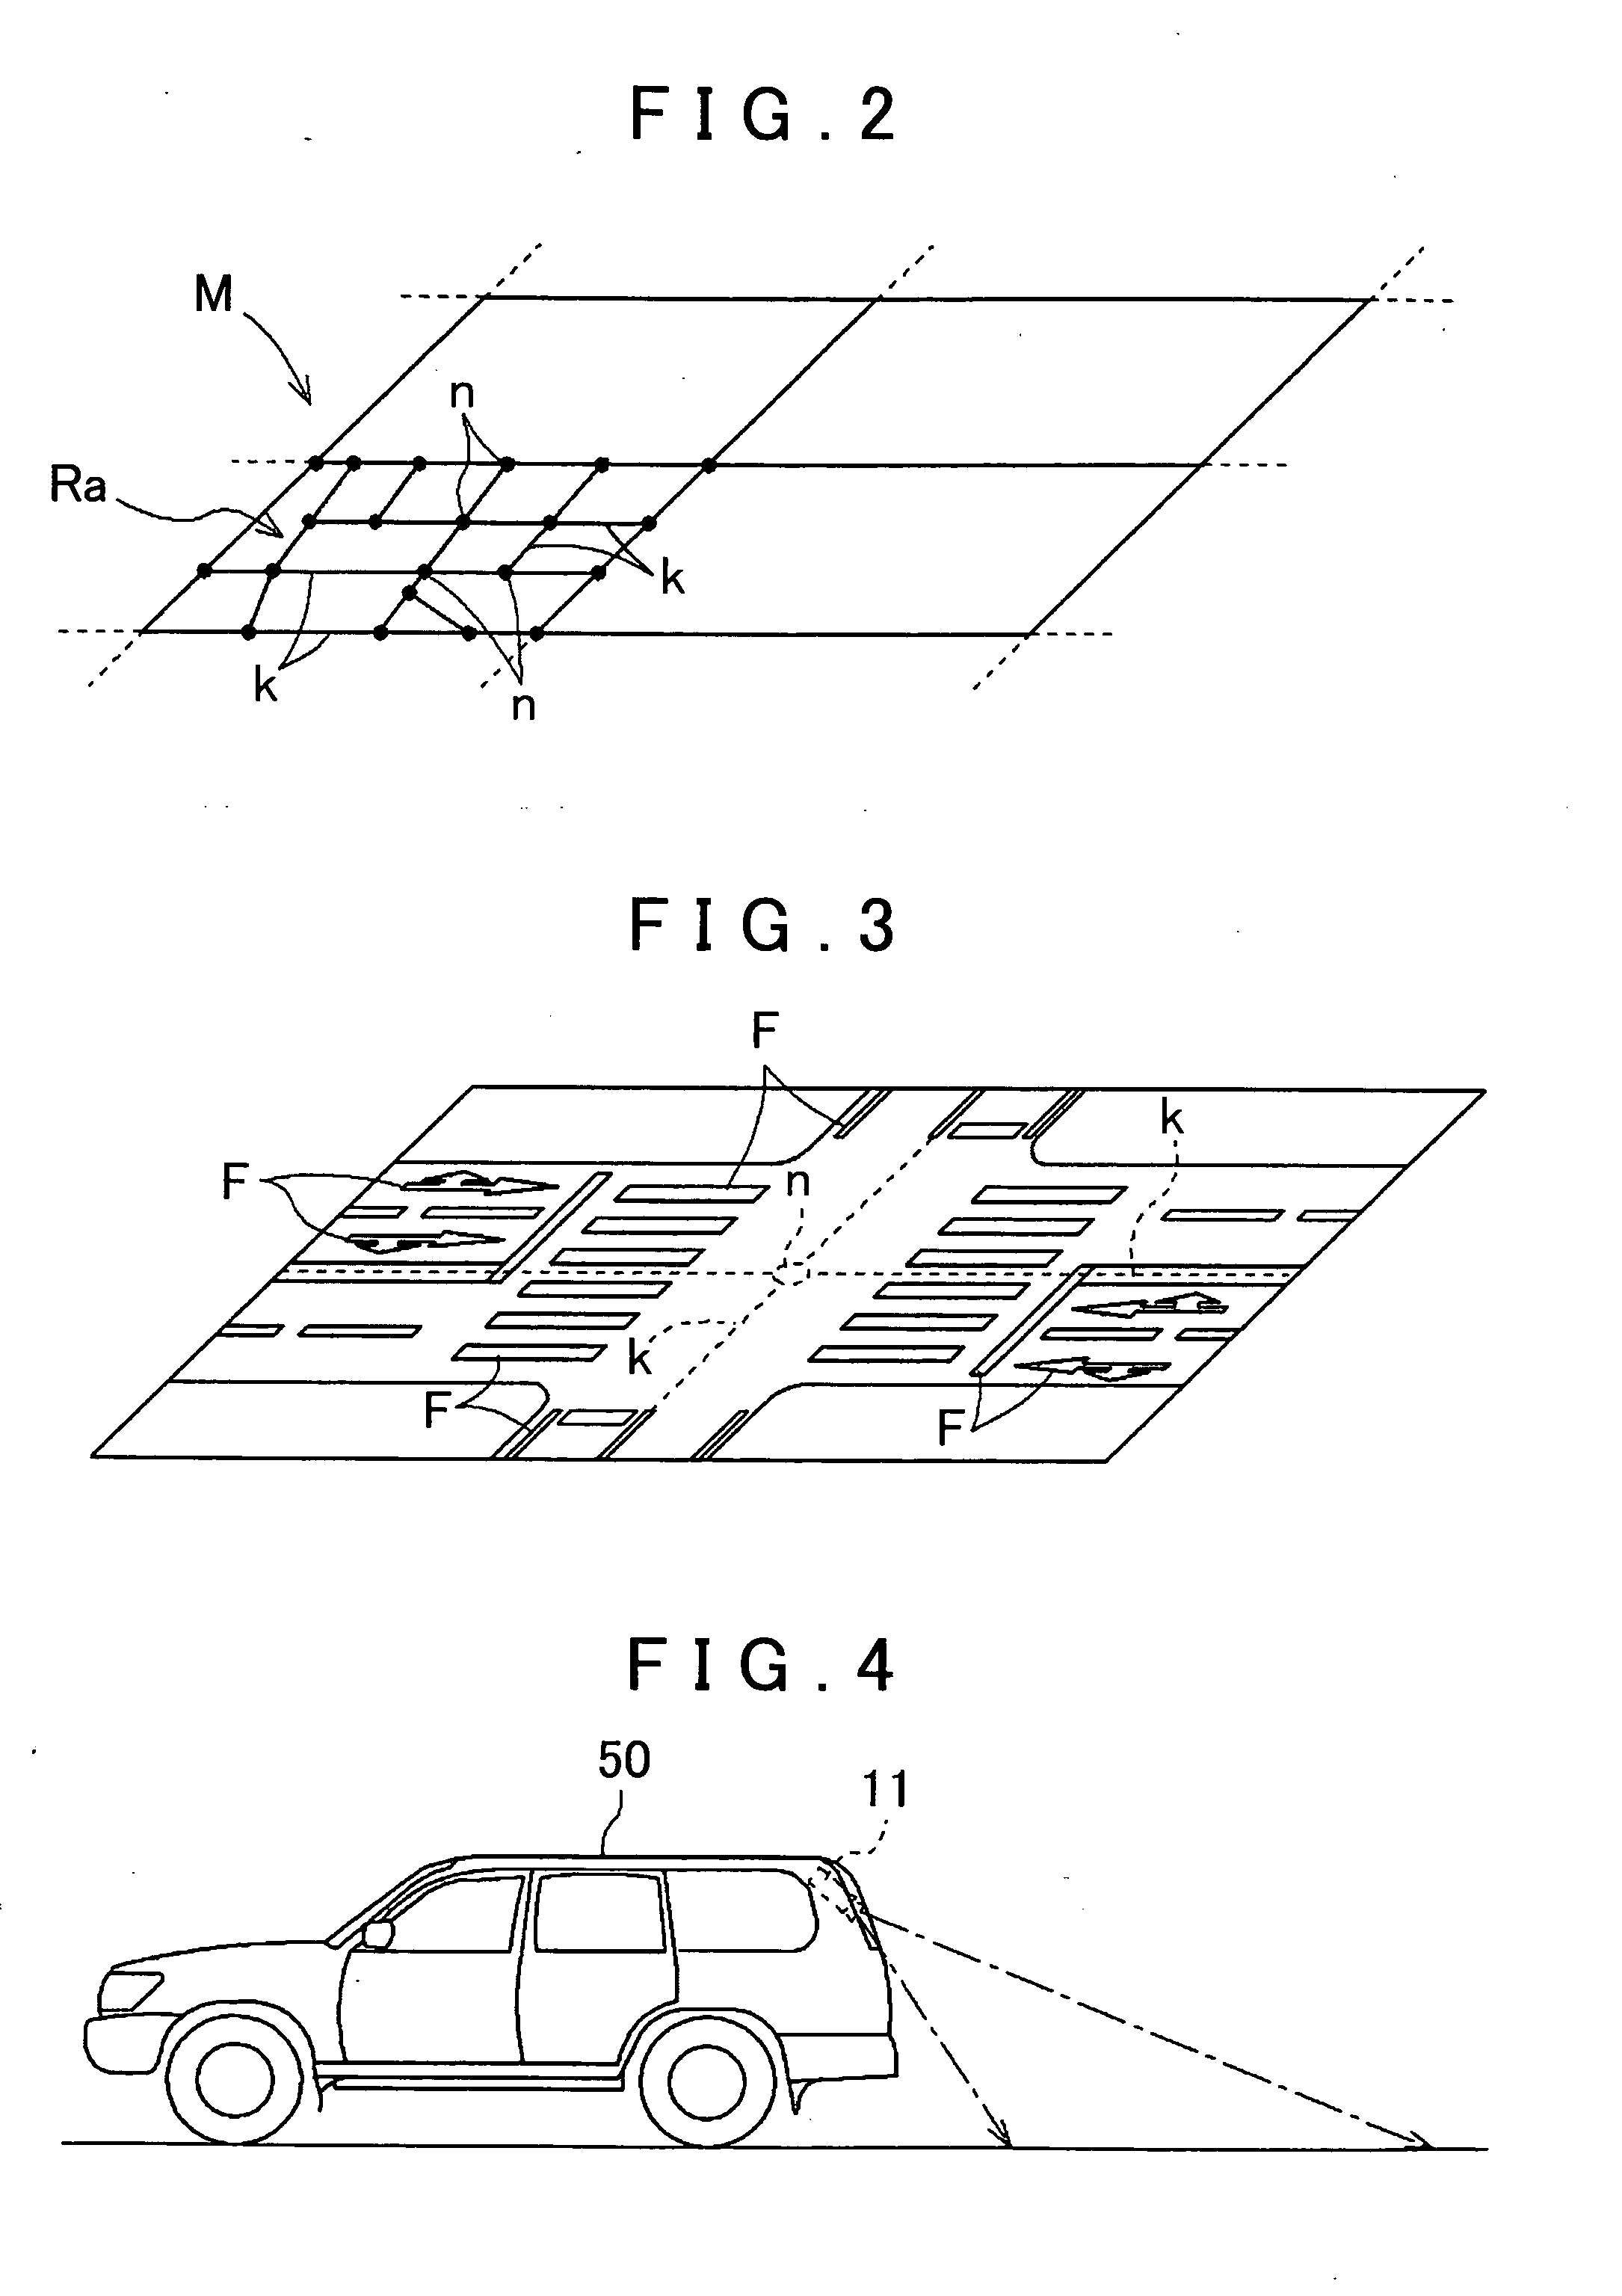 Feature information management apparatuses, methods, and programs